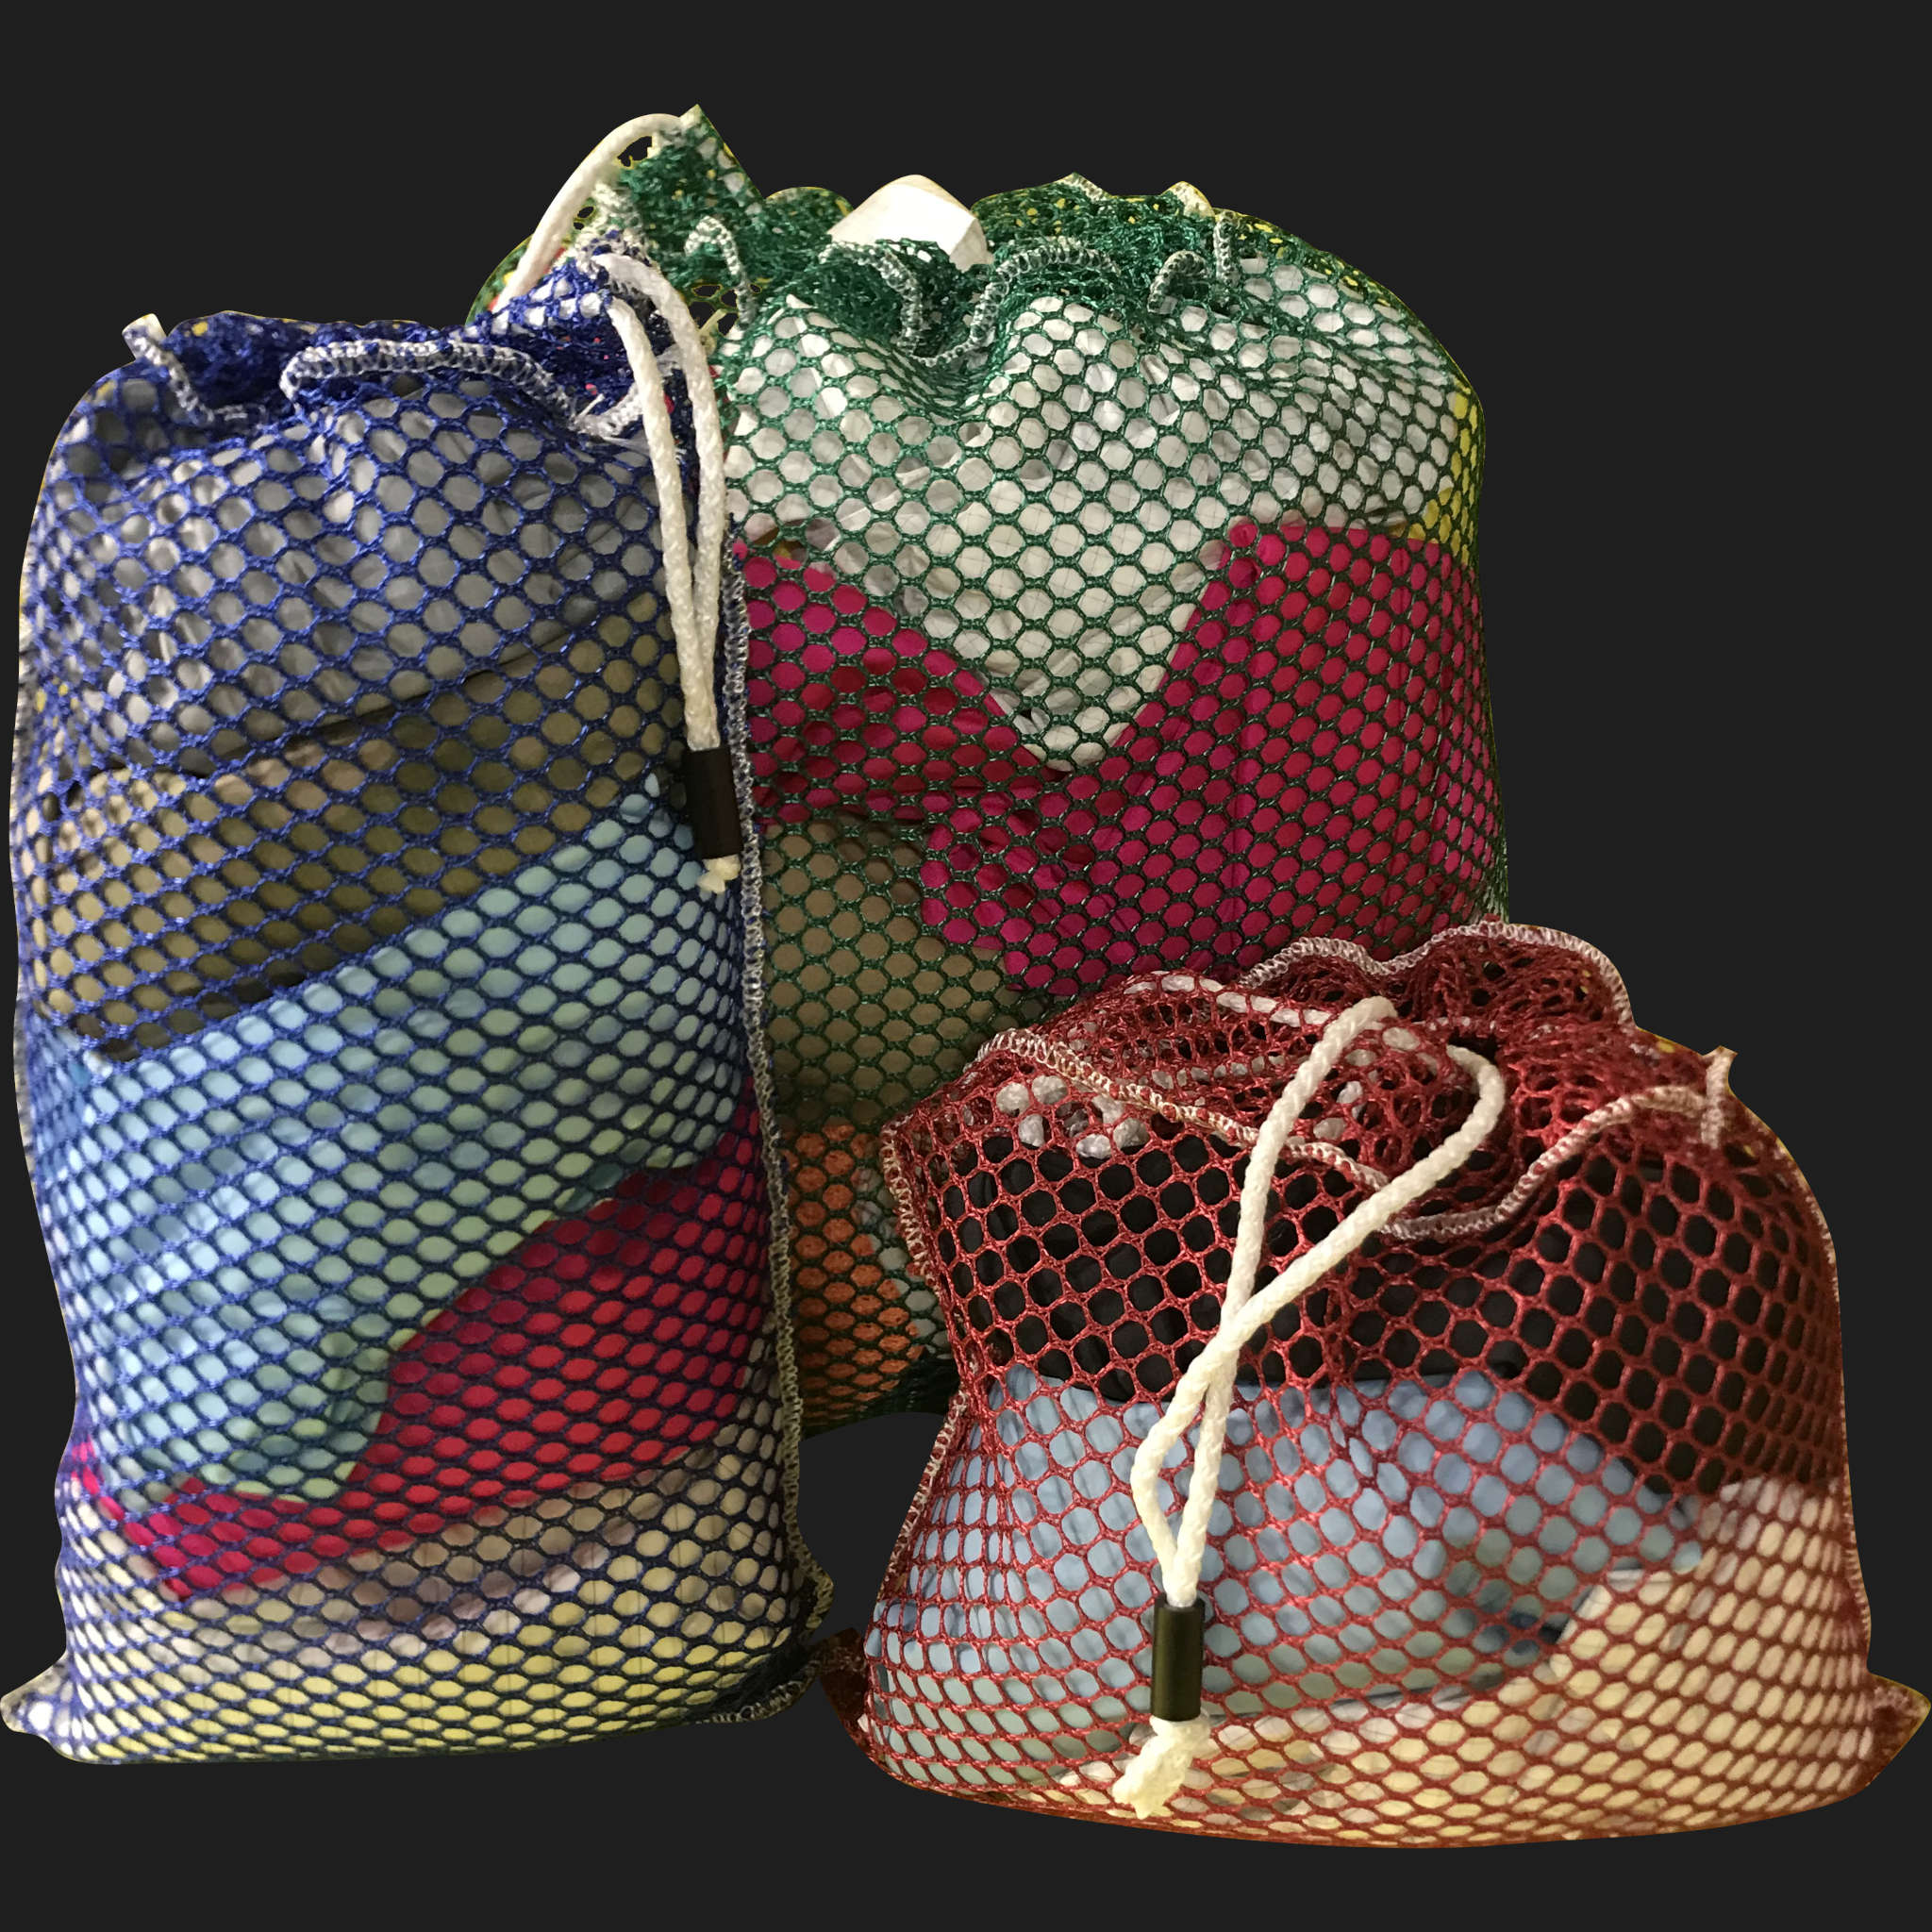 16" x 36" Customized Mesh-Net-Laundry Bags Heavy Duty with Cord and barrellock closure